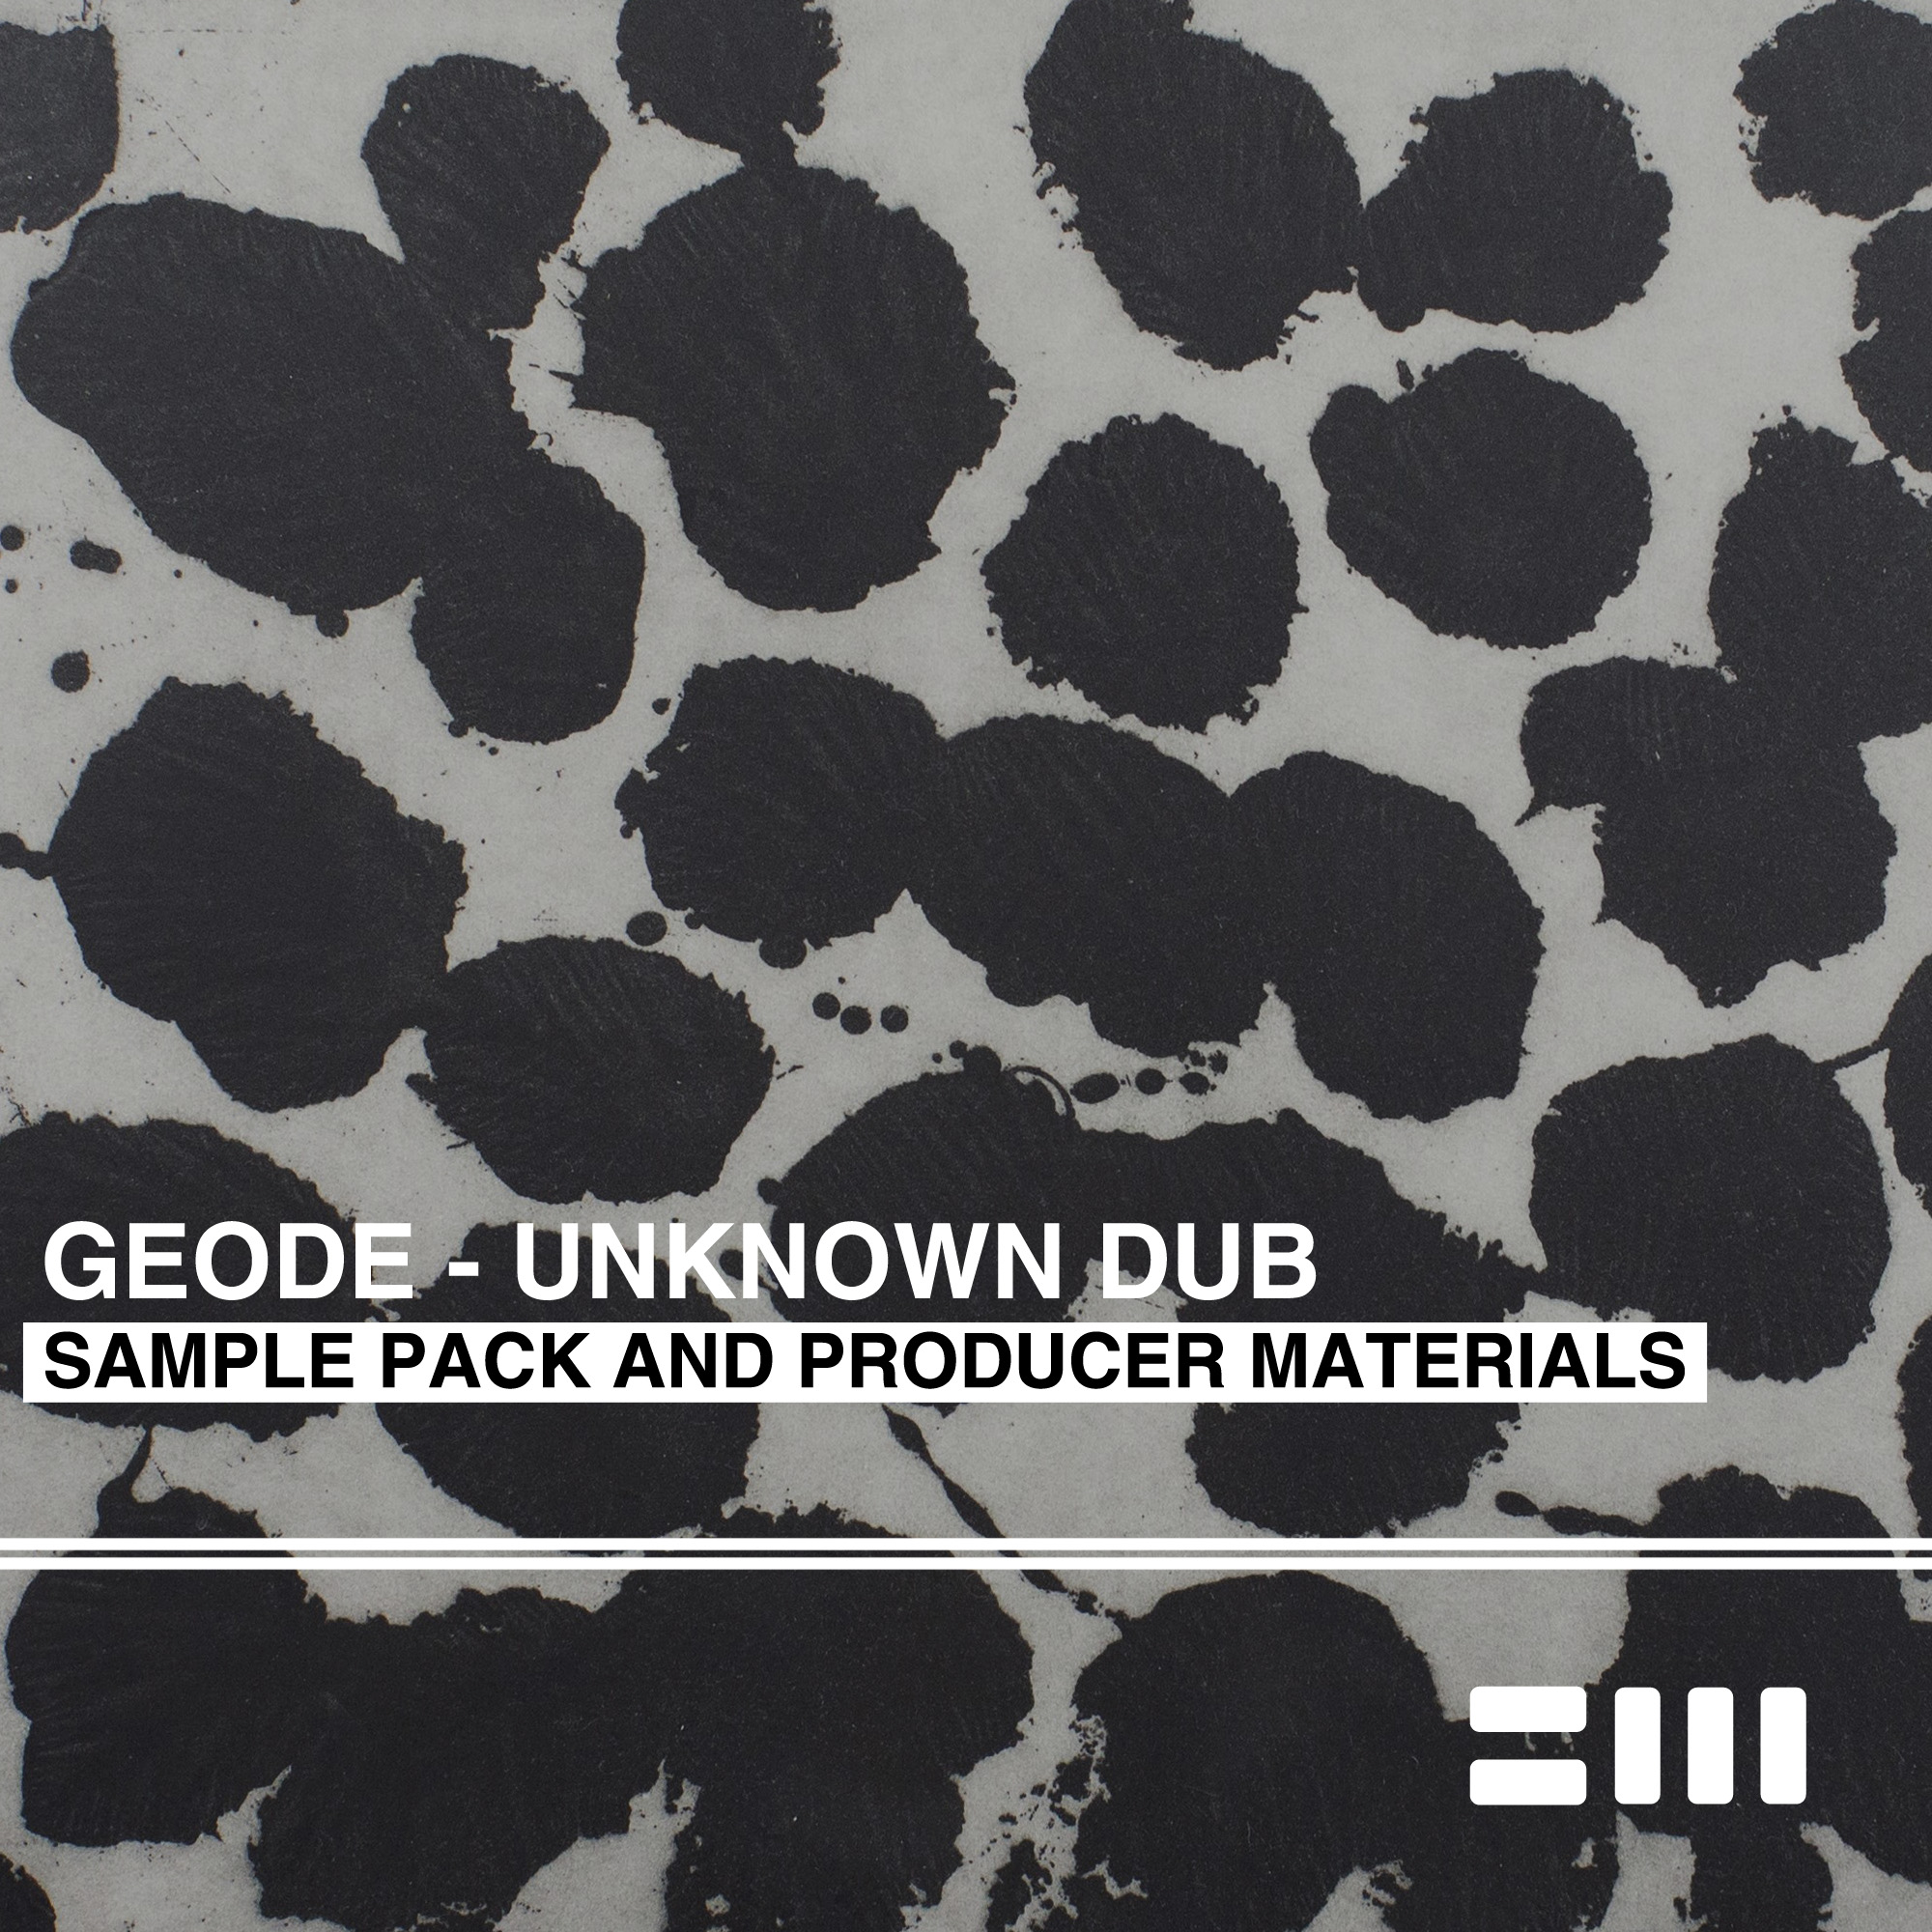 Geode - Unknown Dub Sample Pack